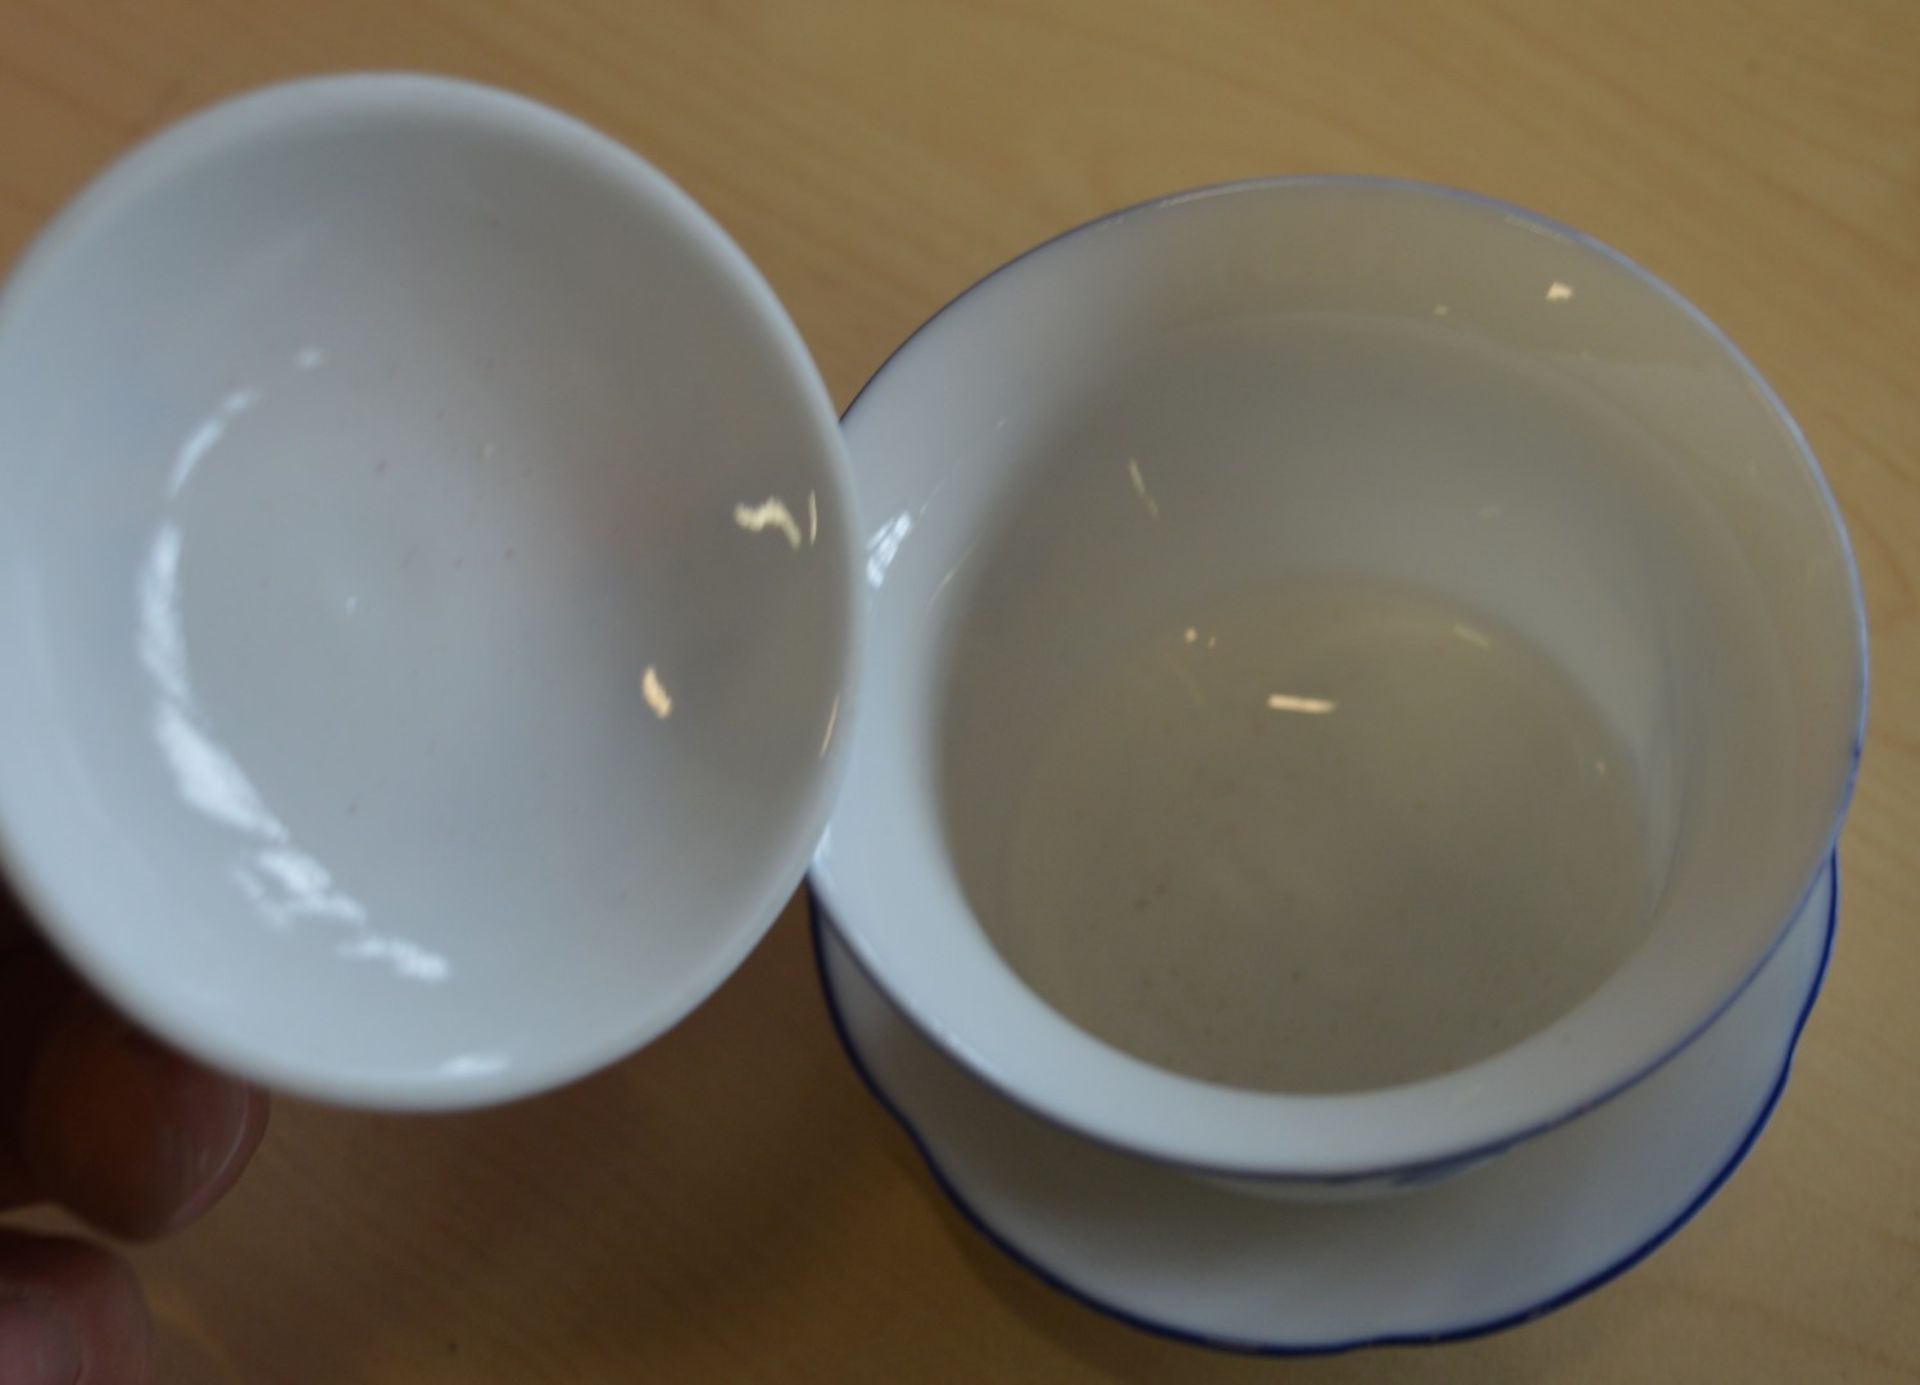 20 x Oriental Cups With Saucers and Lids - Elegant Porcelain Cups / Pots With Fitted Lid and - Image 6 of 6